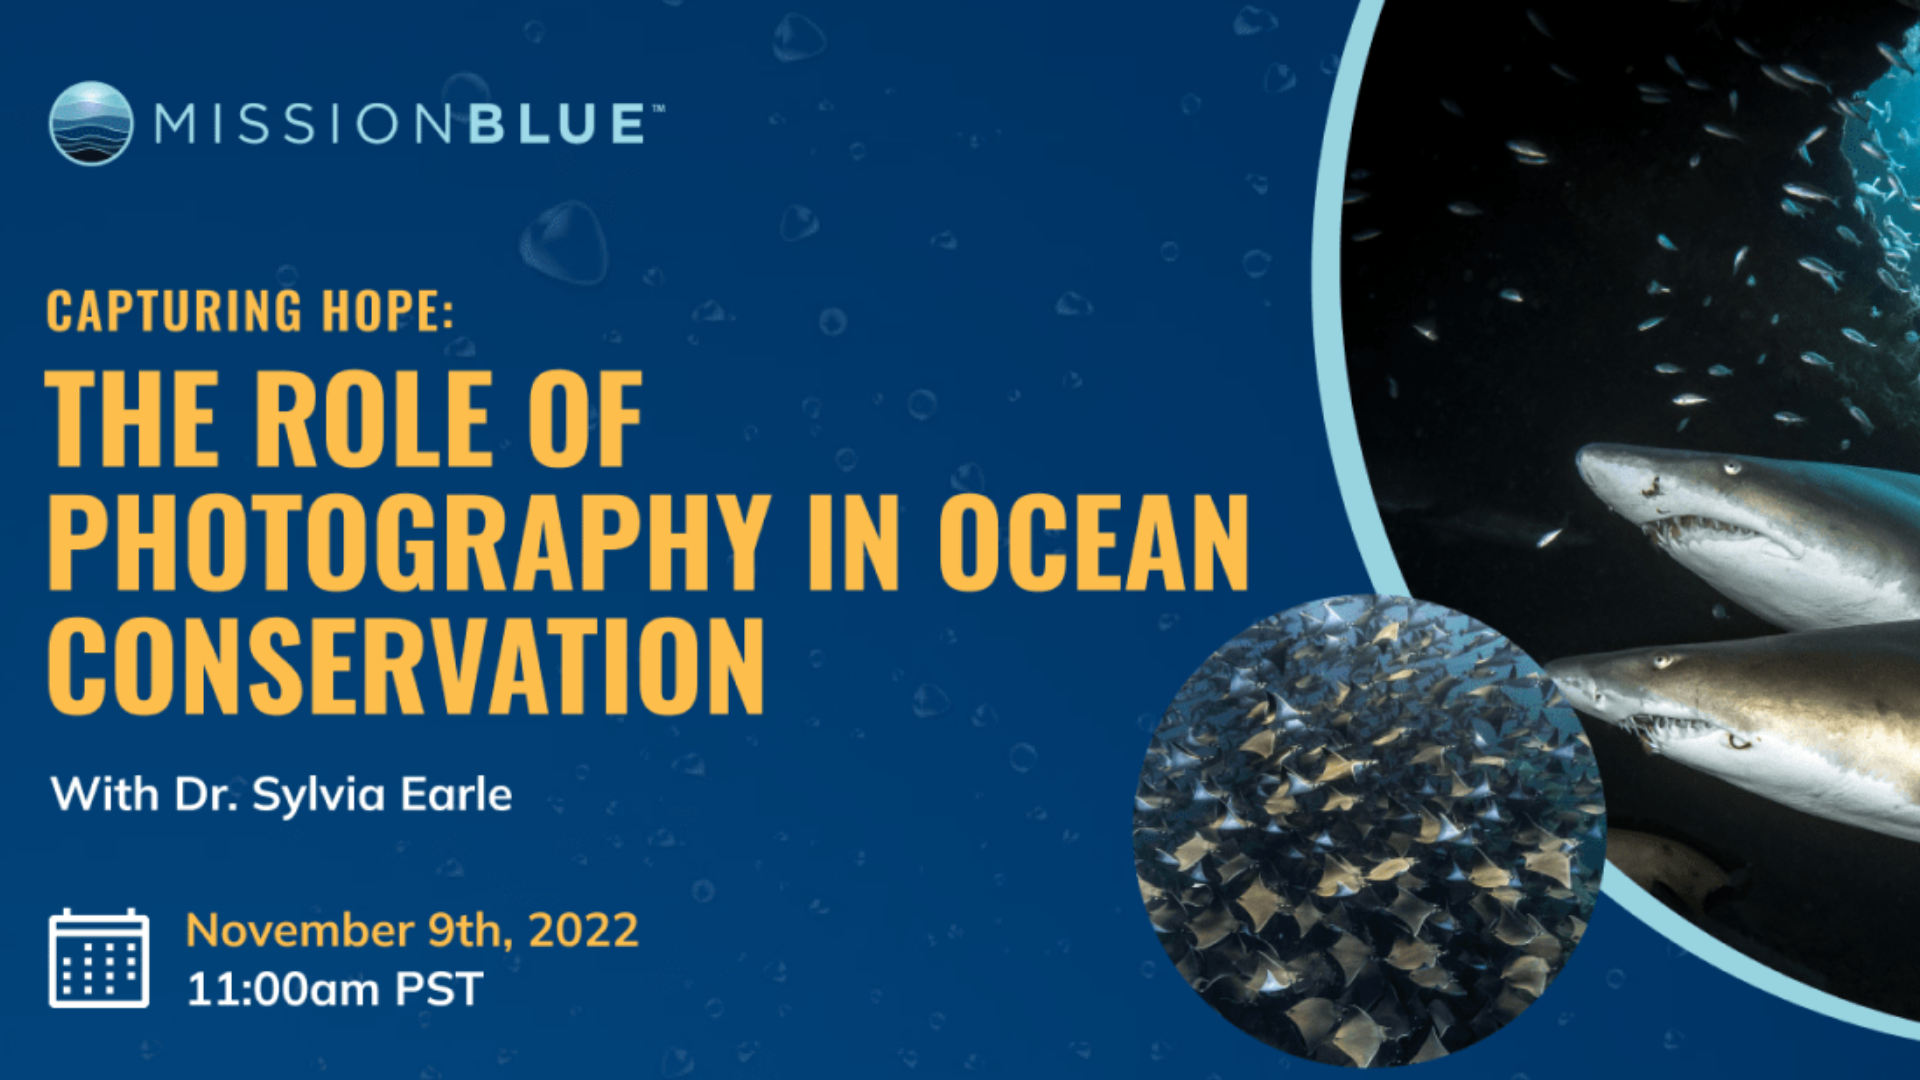 https://missionblue.org/wp-content/uploads/2022/11/Pre-Roll-Photography-Webinar-Mission-Blue-1.png